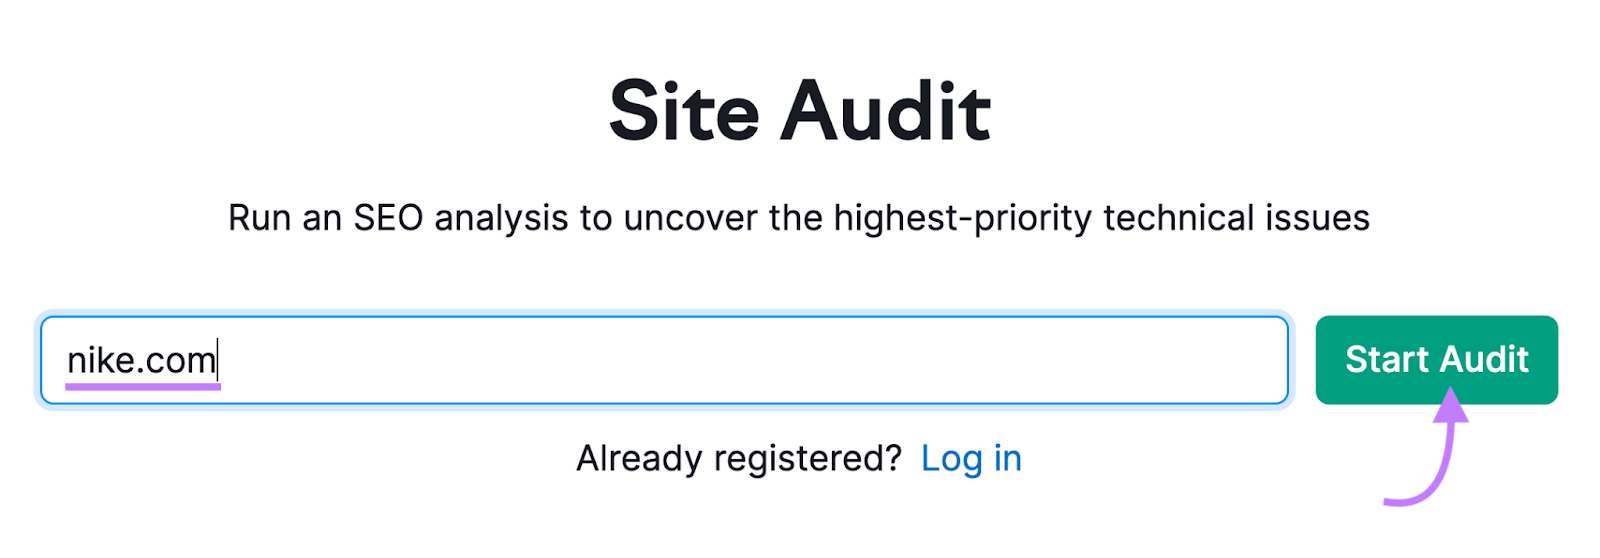 "nike.com" entered into Site Audit search bar